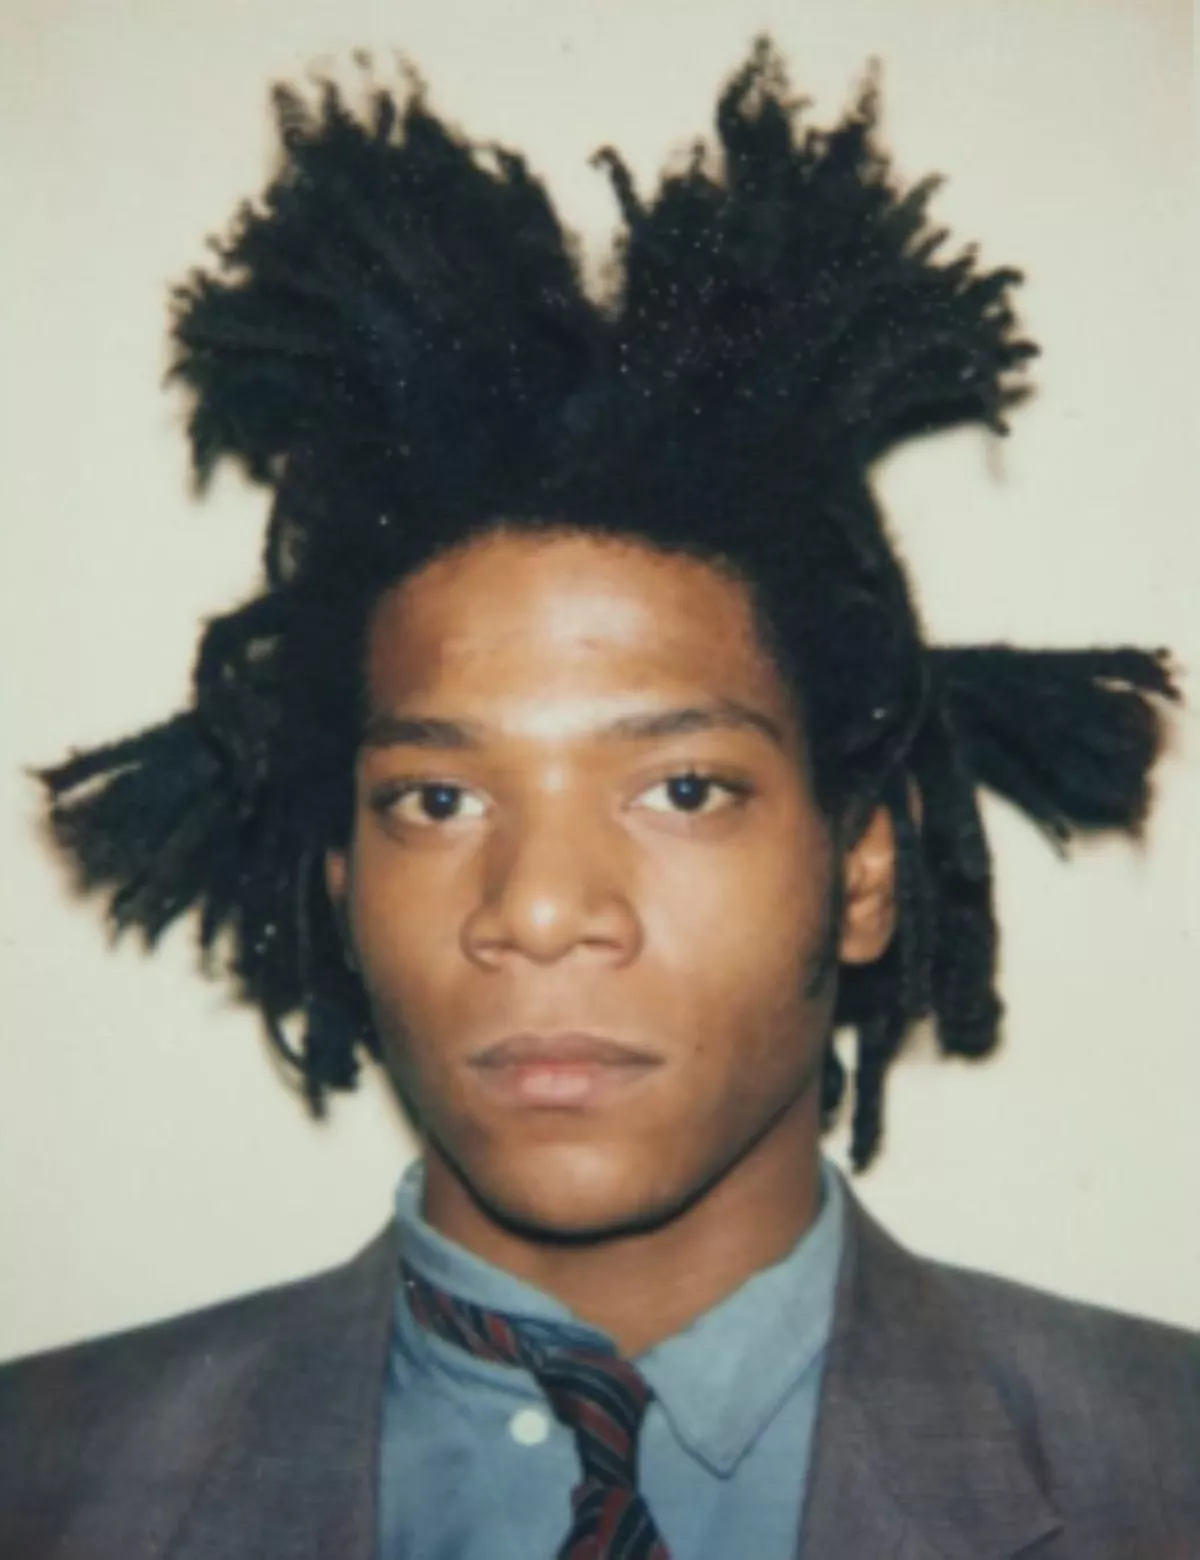 104 Facts About Jean-Michel Basquiat | FactSnippet